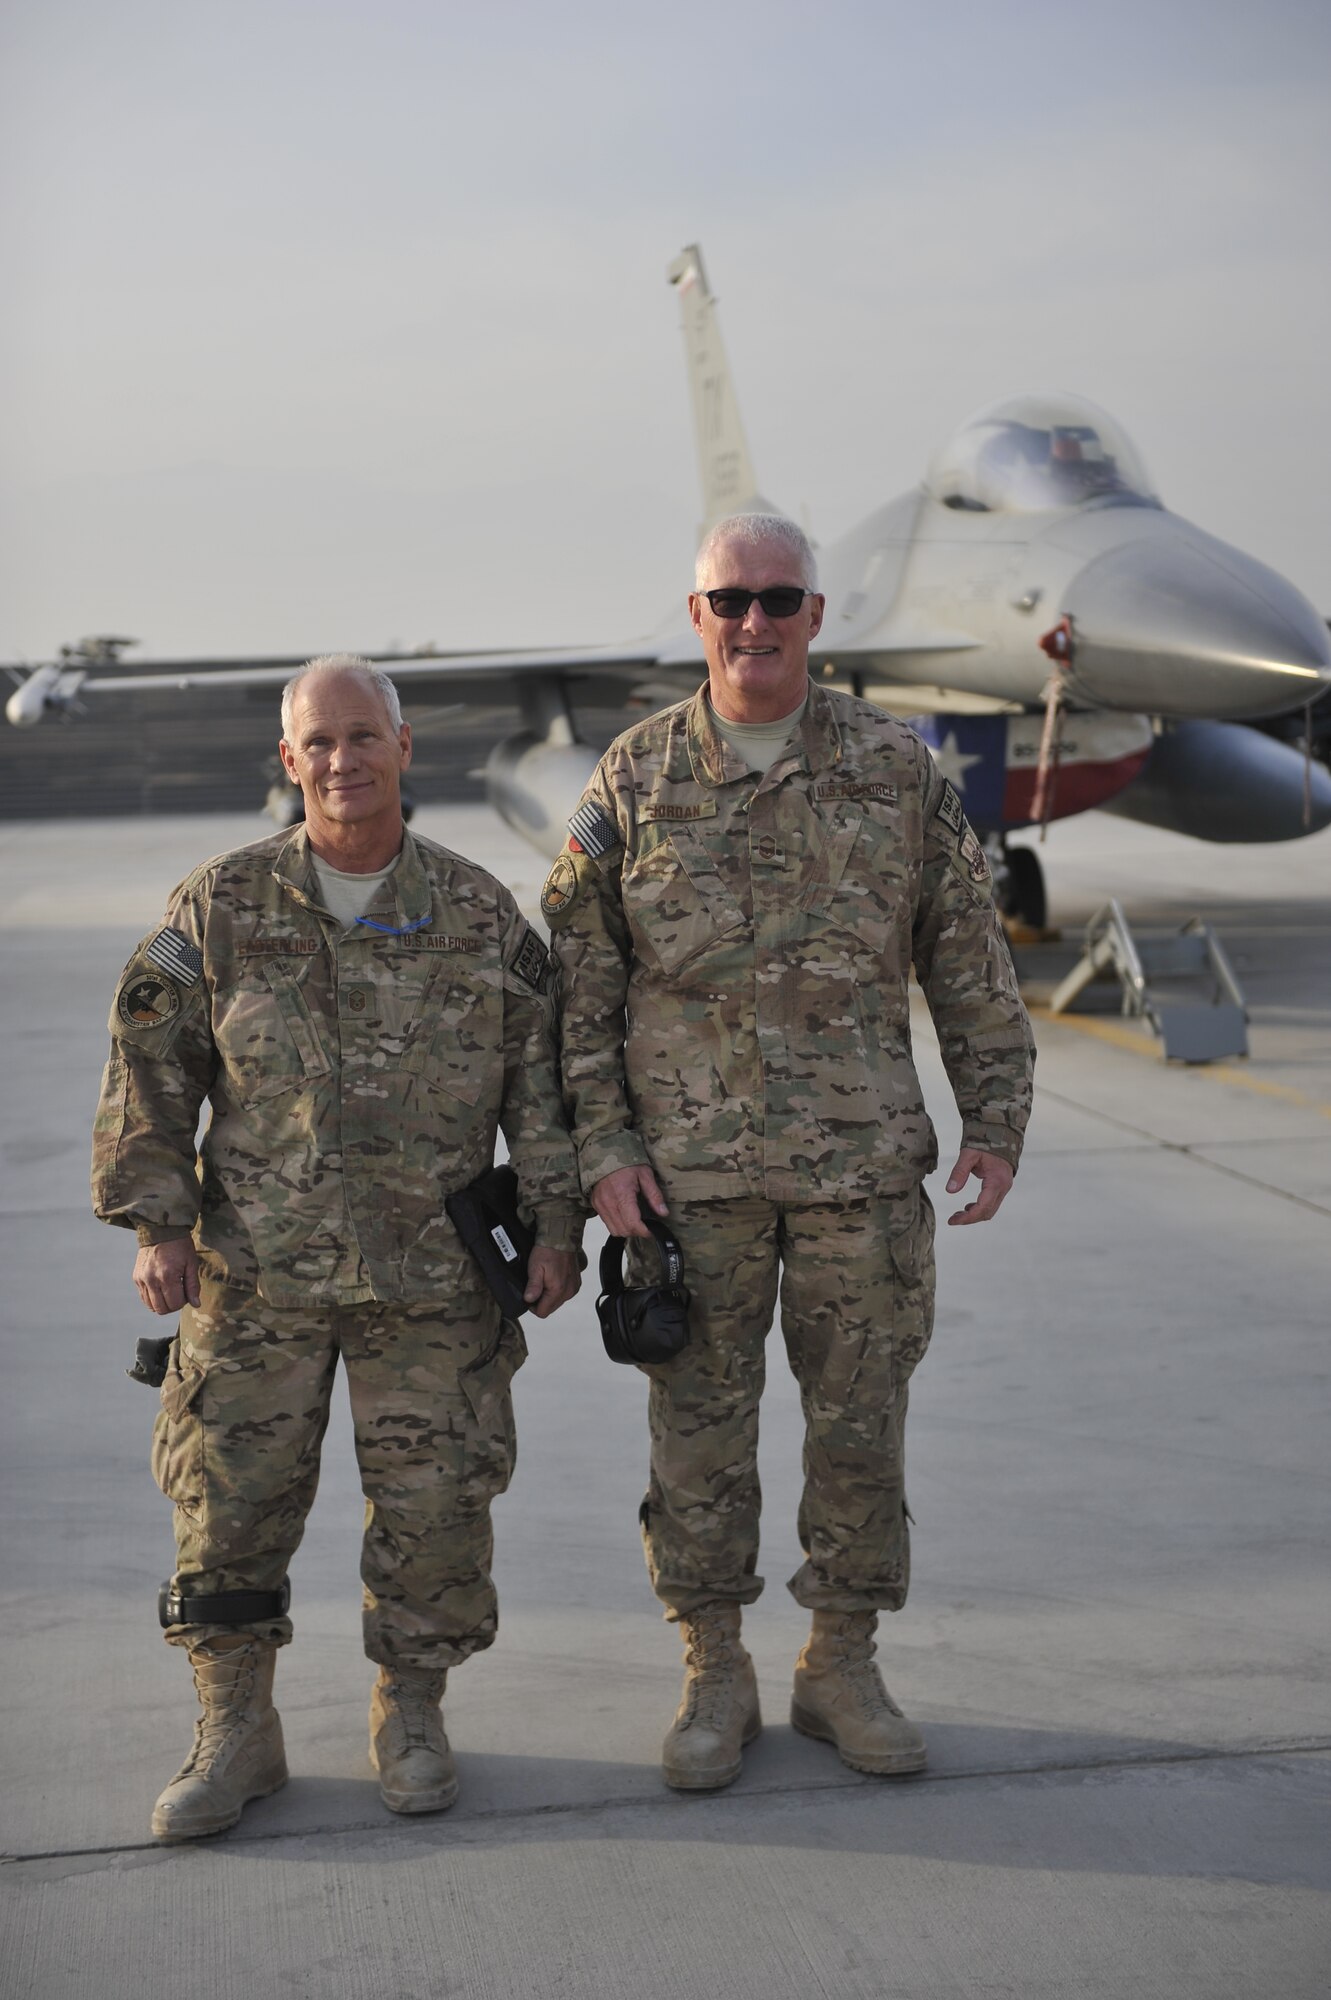 U.S. Air Force Master Sgt. Doyle Easterling and Senior Master Sgt. Paul Jordan stand together in front of an F-16 Fighting Falcon after a successful engine test run at Bagram Airfield, Afghanistan, Jan. 20, 2014. Both are deployed out of Carswell Joint Reserve Base in Fort Worth, Texas to Bagram, and will be retiring this year after a combined 78 years of military service. (U.S. Air Force photo by Senior Master Sgt. Gary J. Rihn/Released)